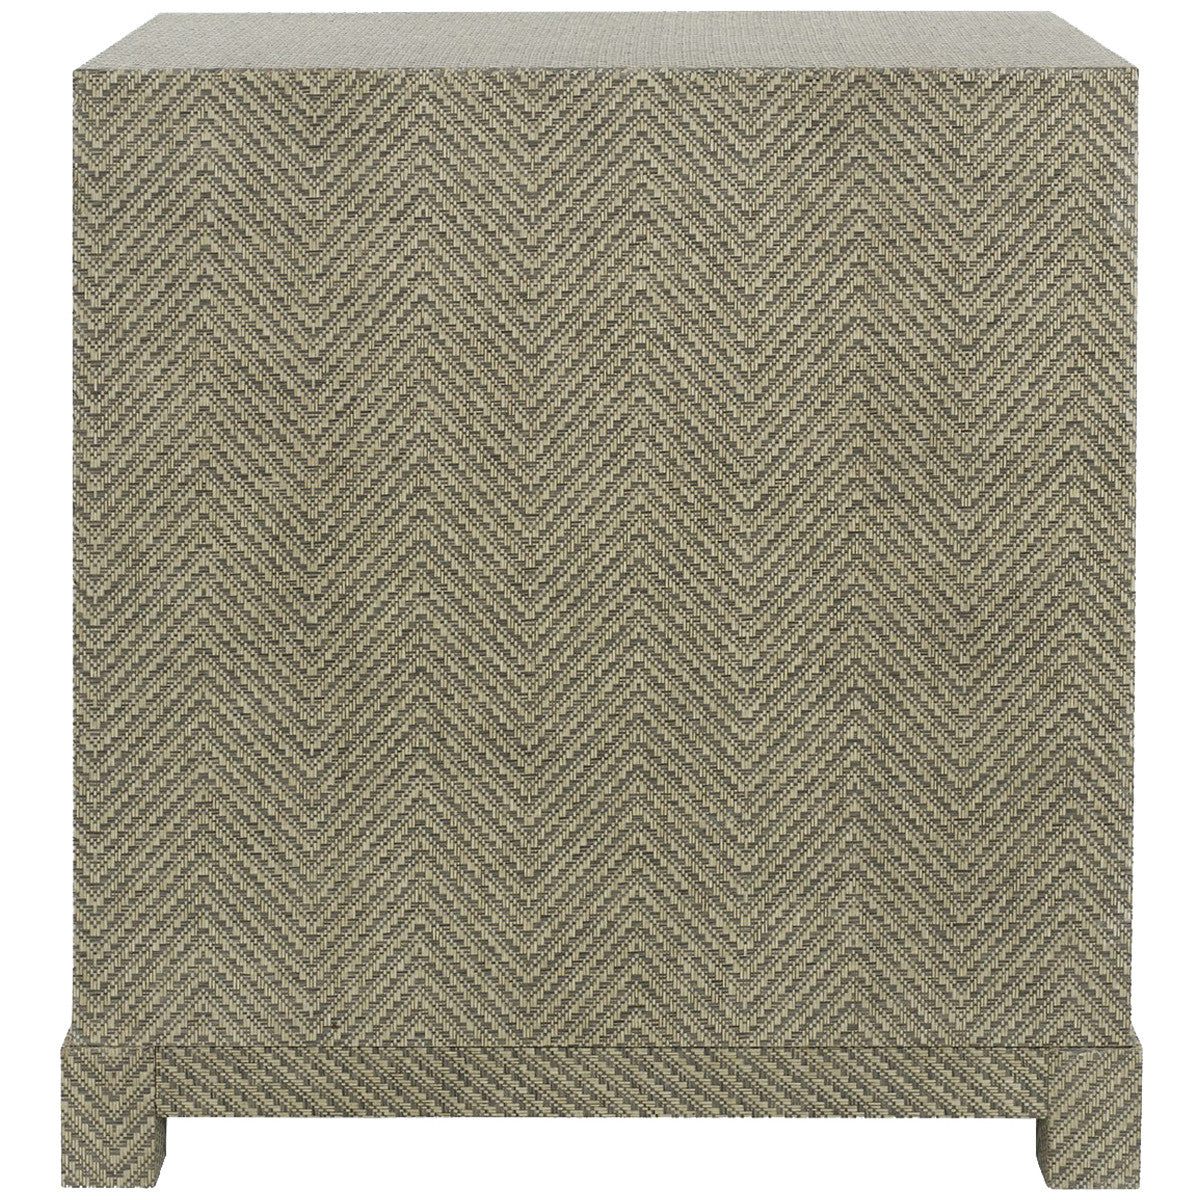 Villa &amp; House Brittany 3-Drawer Side Table in Gray Tweed